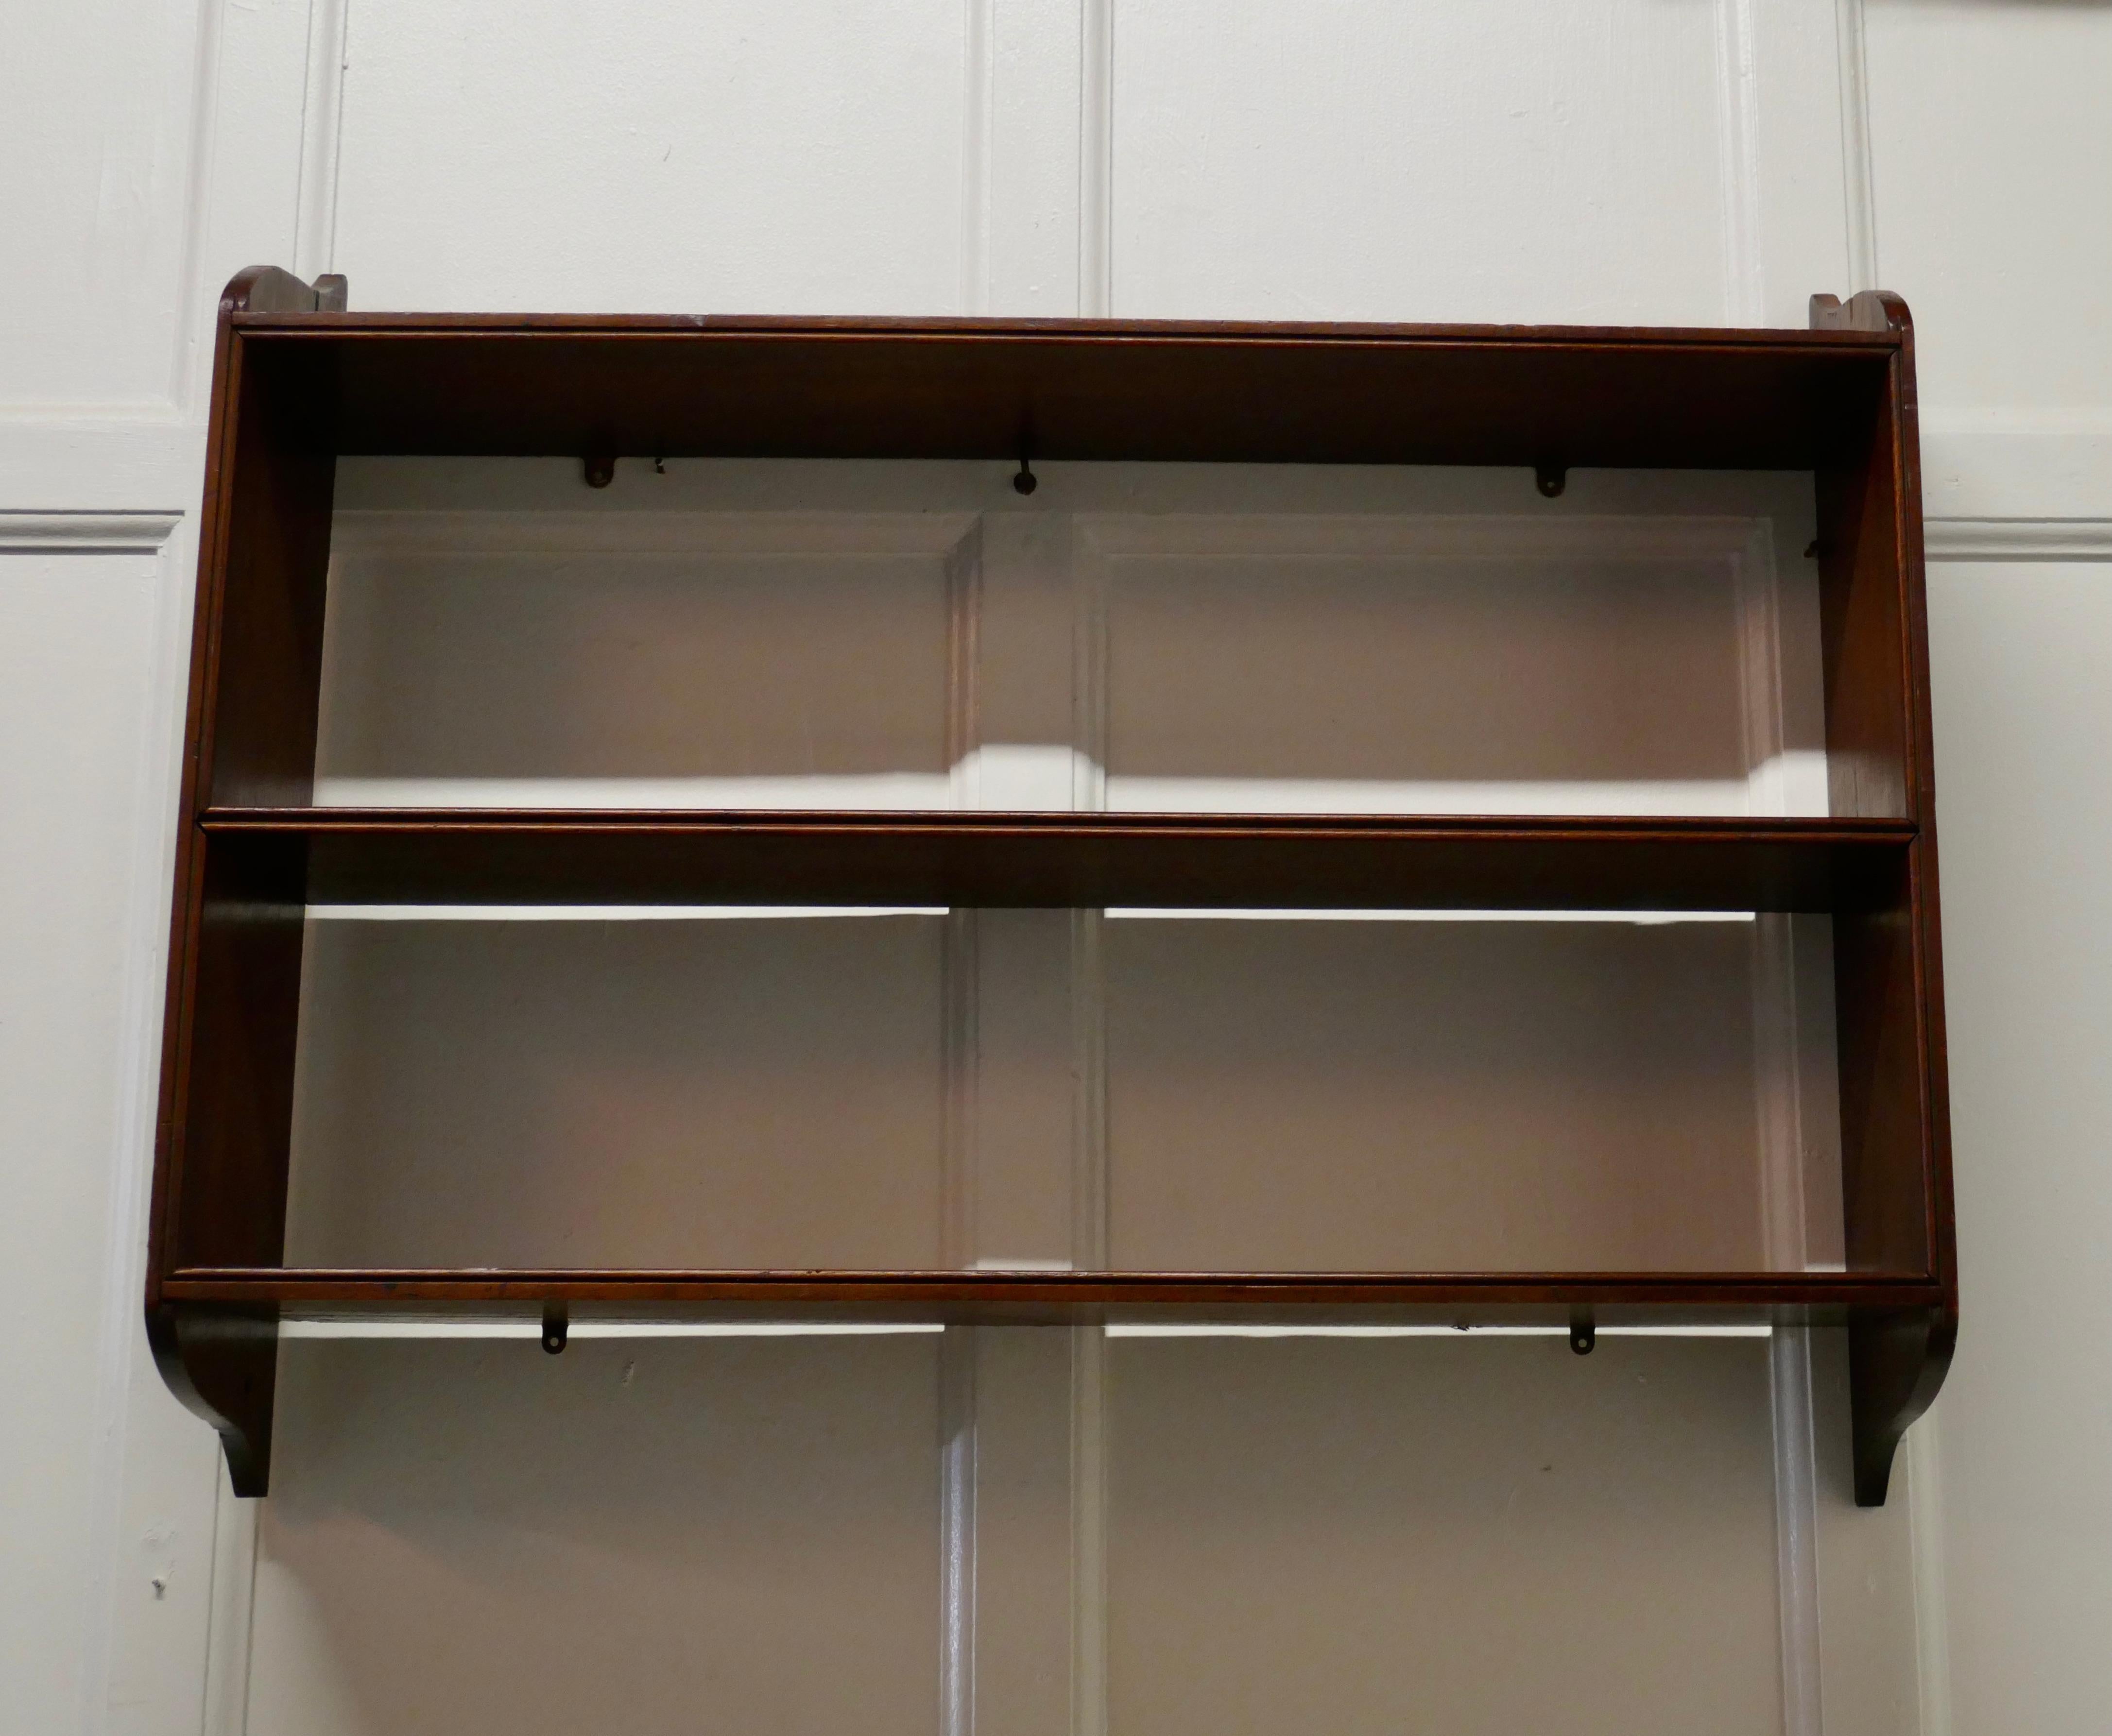 Mahogany wall hanging book shelf.

This charming little shelf unit, has 3 shelves
The shelf is in good condition, with a small piece missing on one side and would work well in the bathroom kitchen or bedroom
The shelf is 7” deep, 33” long and